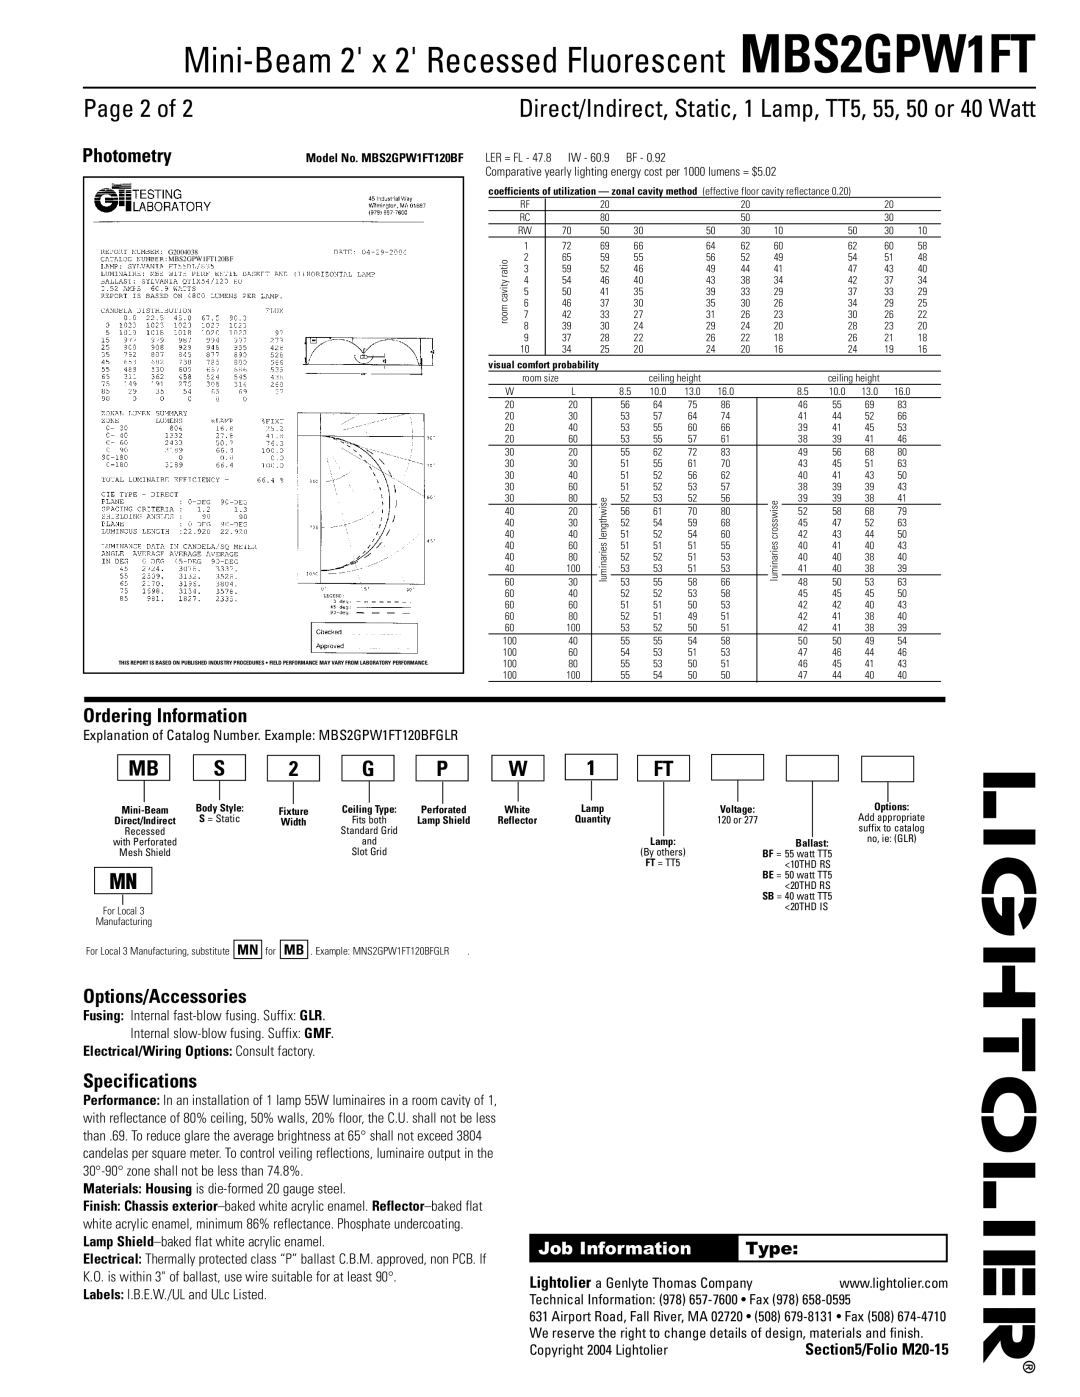 Lightolier MBS2GPW1FT Page 2 of, Photometry, Ordering Information, Options/Accessories, Specifications, Job Information 